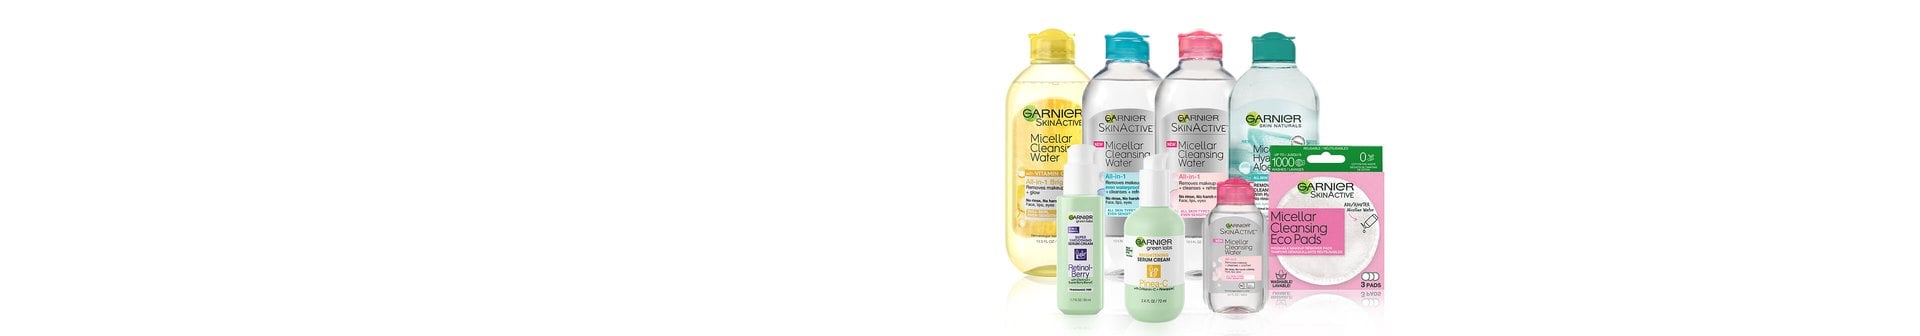 Skin Care Products and Tips For Face And Body - Garnier